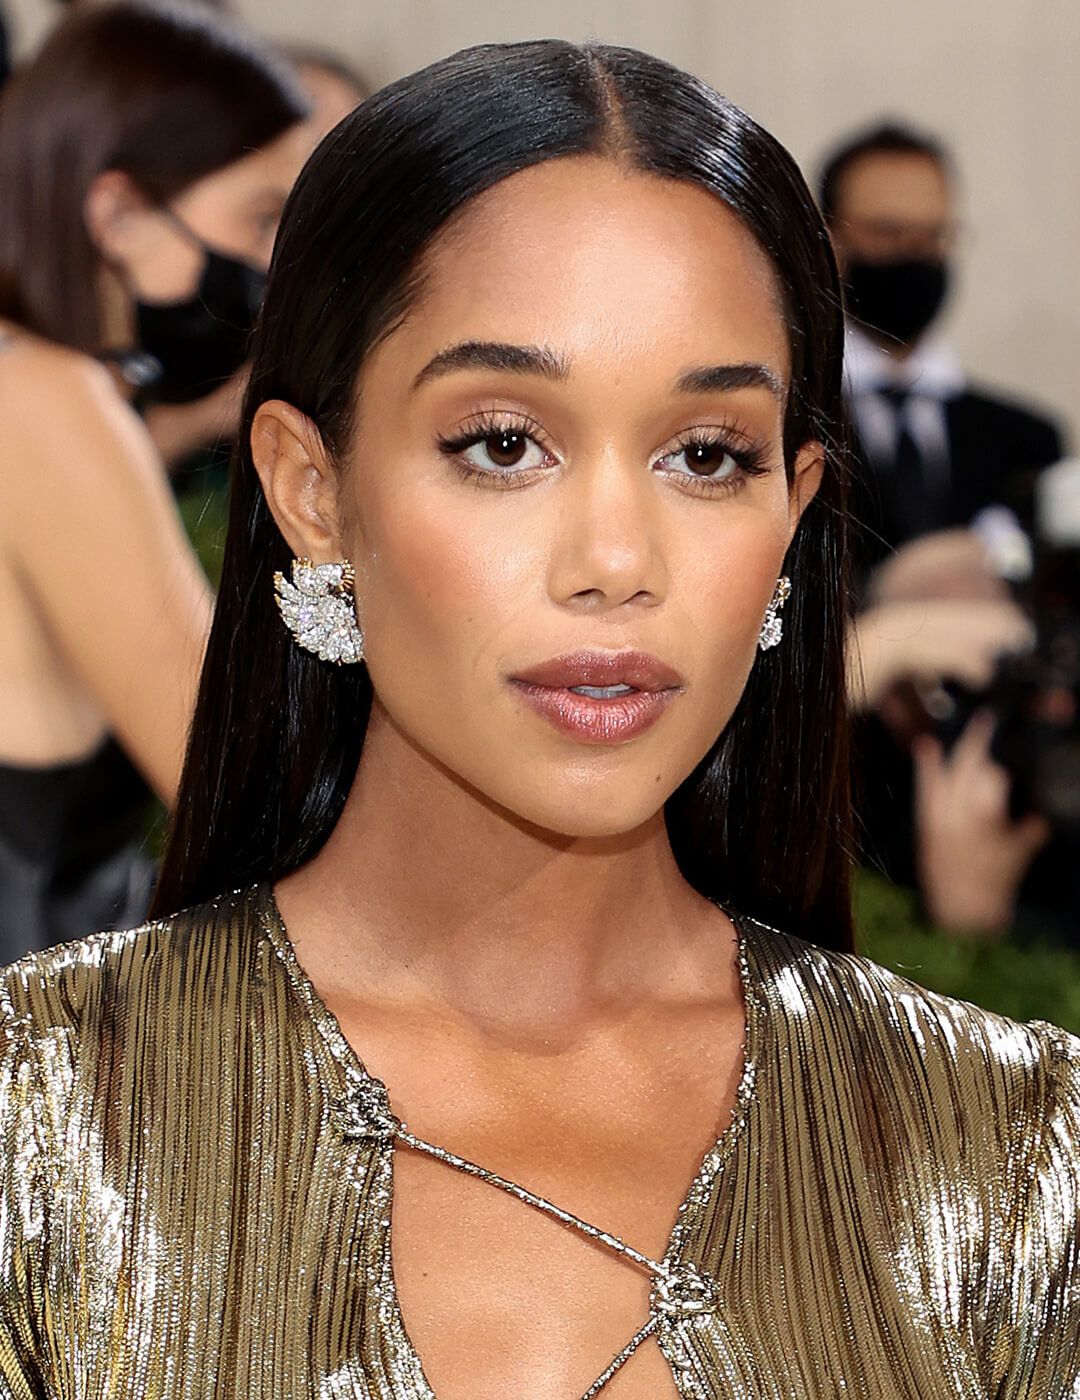 Laura Harrier looking elegant in a long and sleek hairstyle and textured gold dress